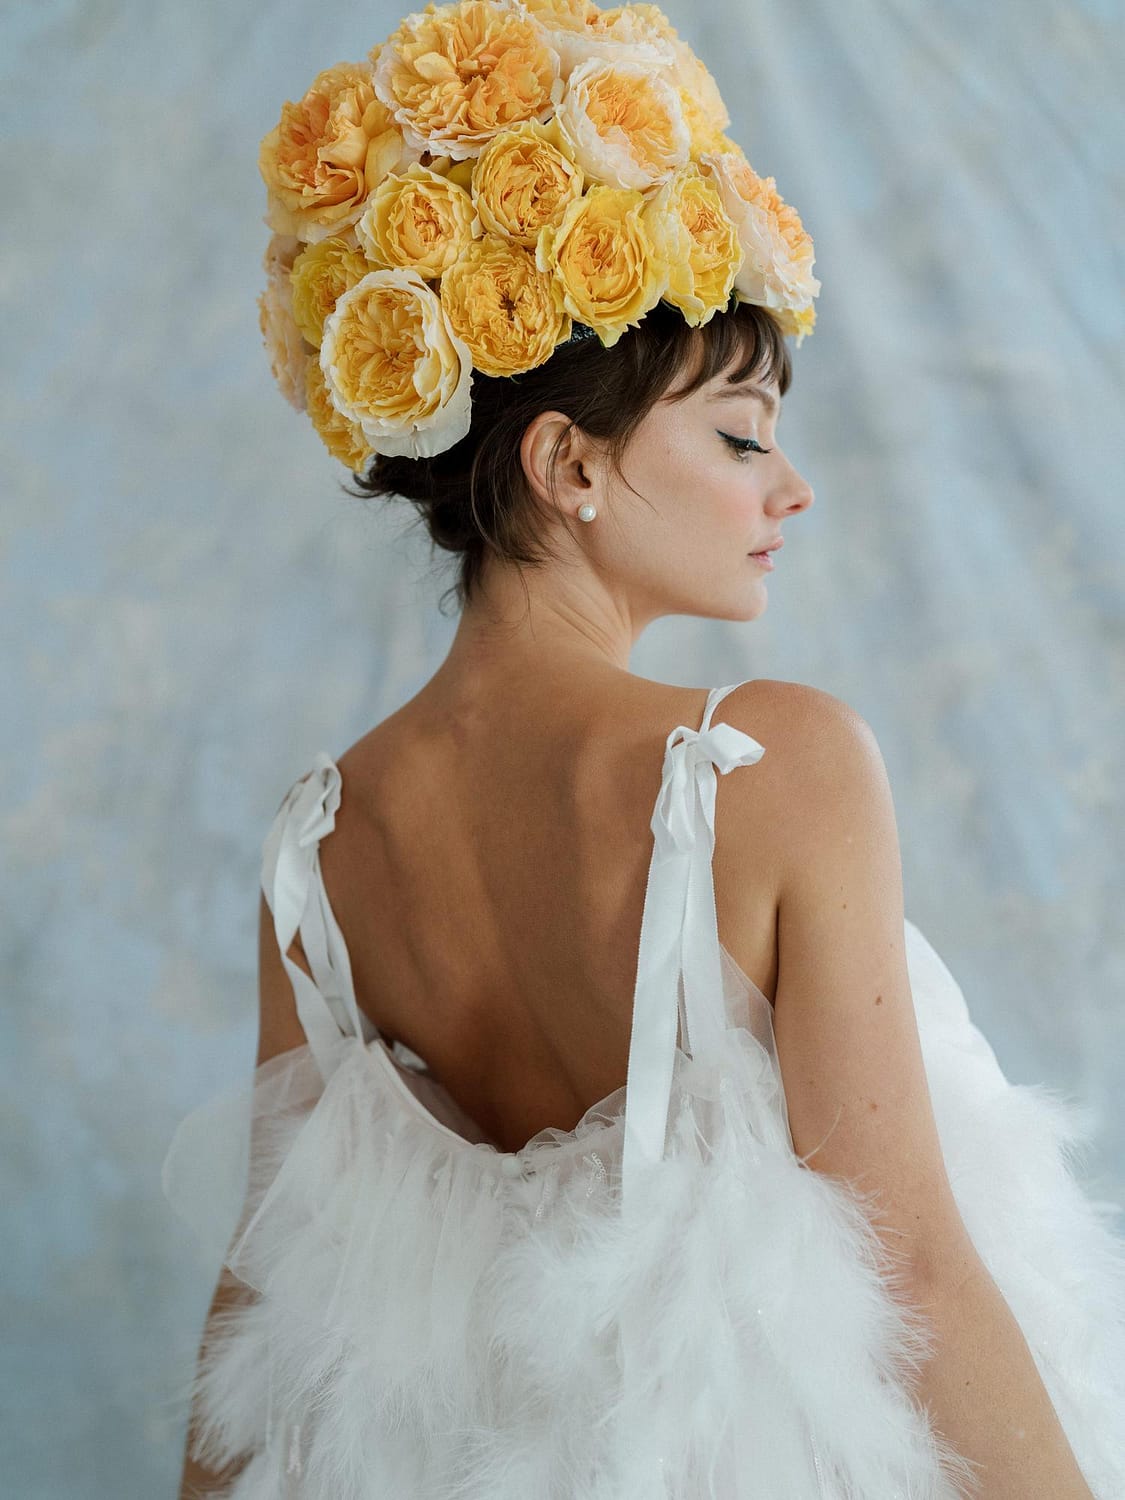 Fashion Editorial With Yellow Wedding Flowers